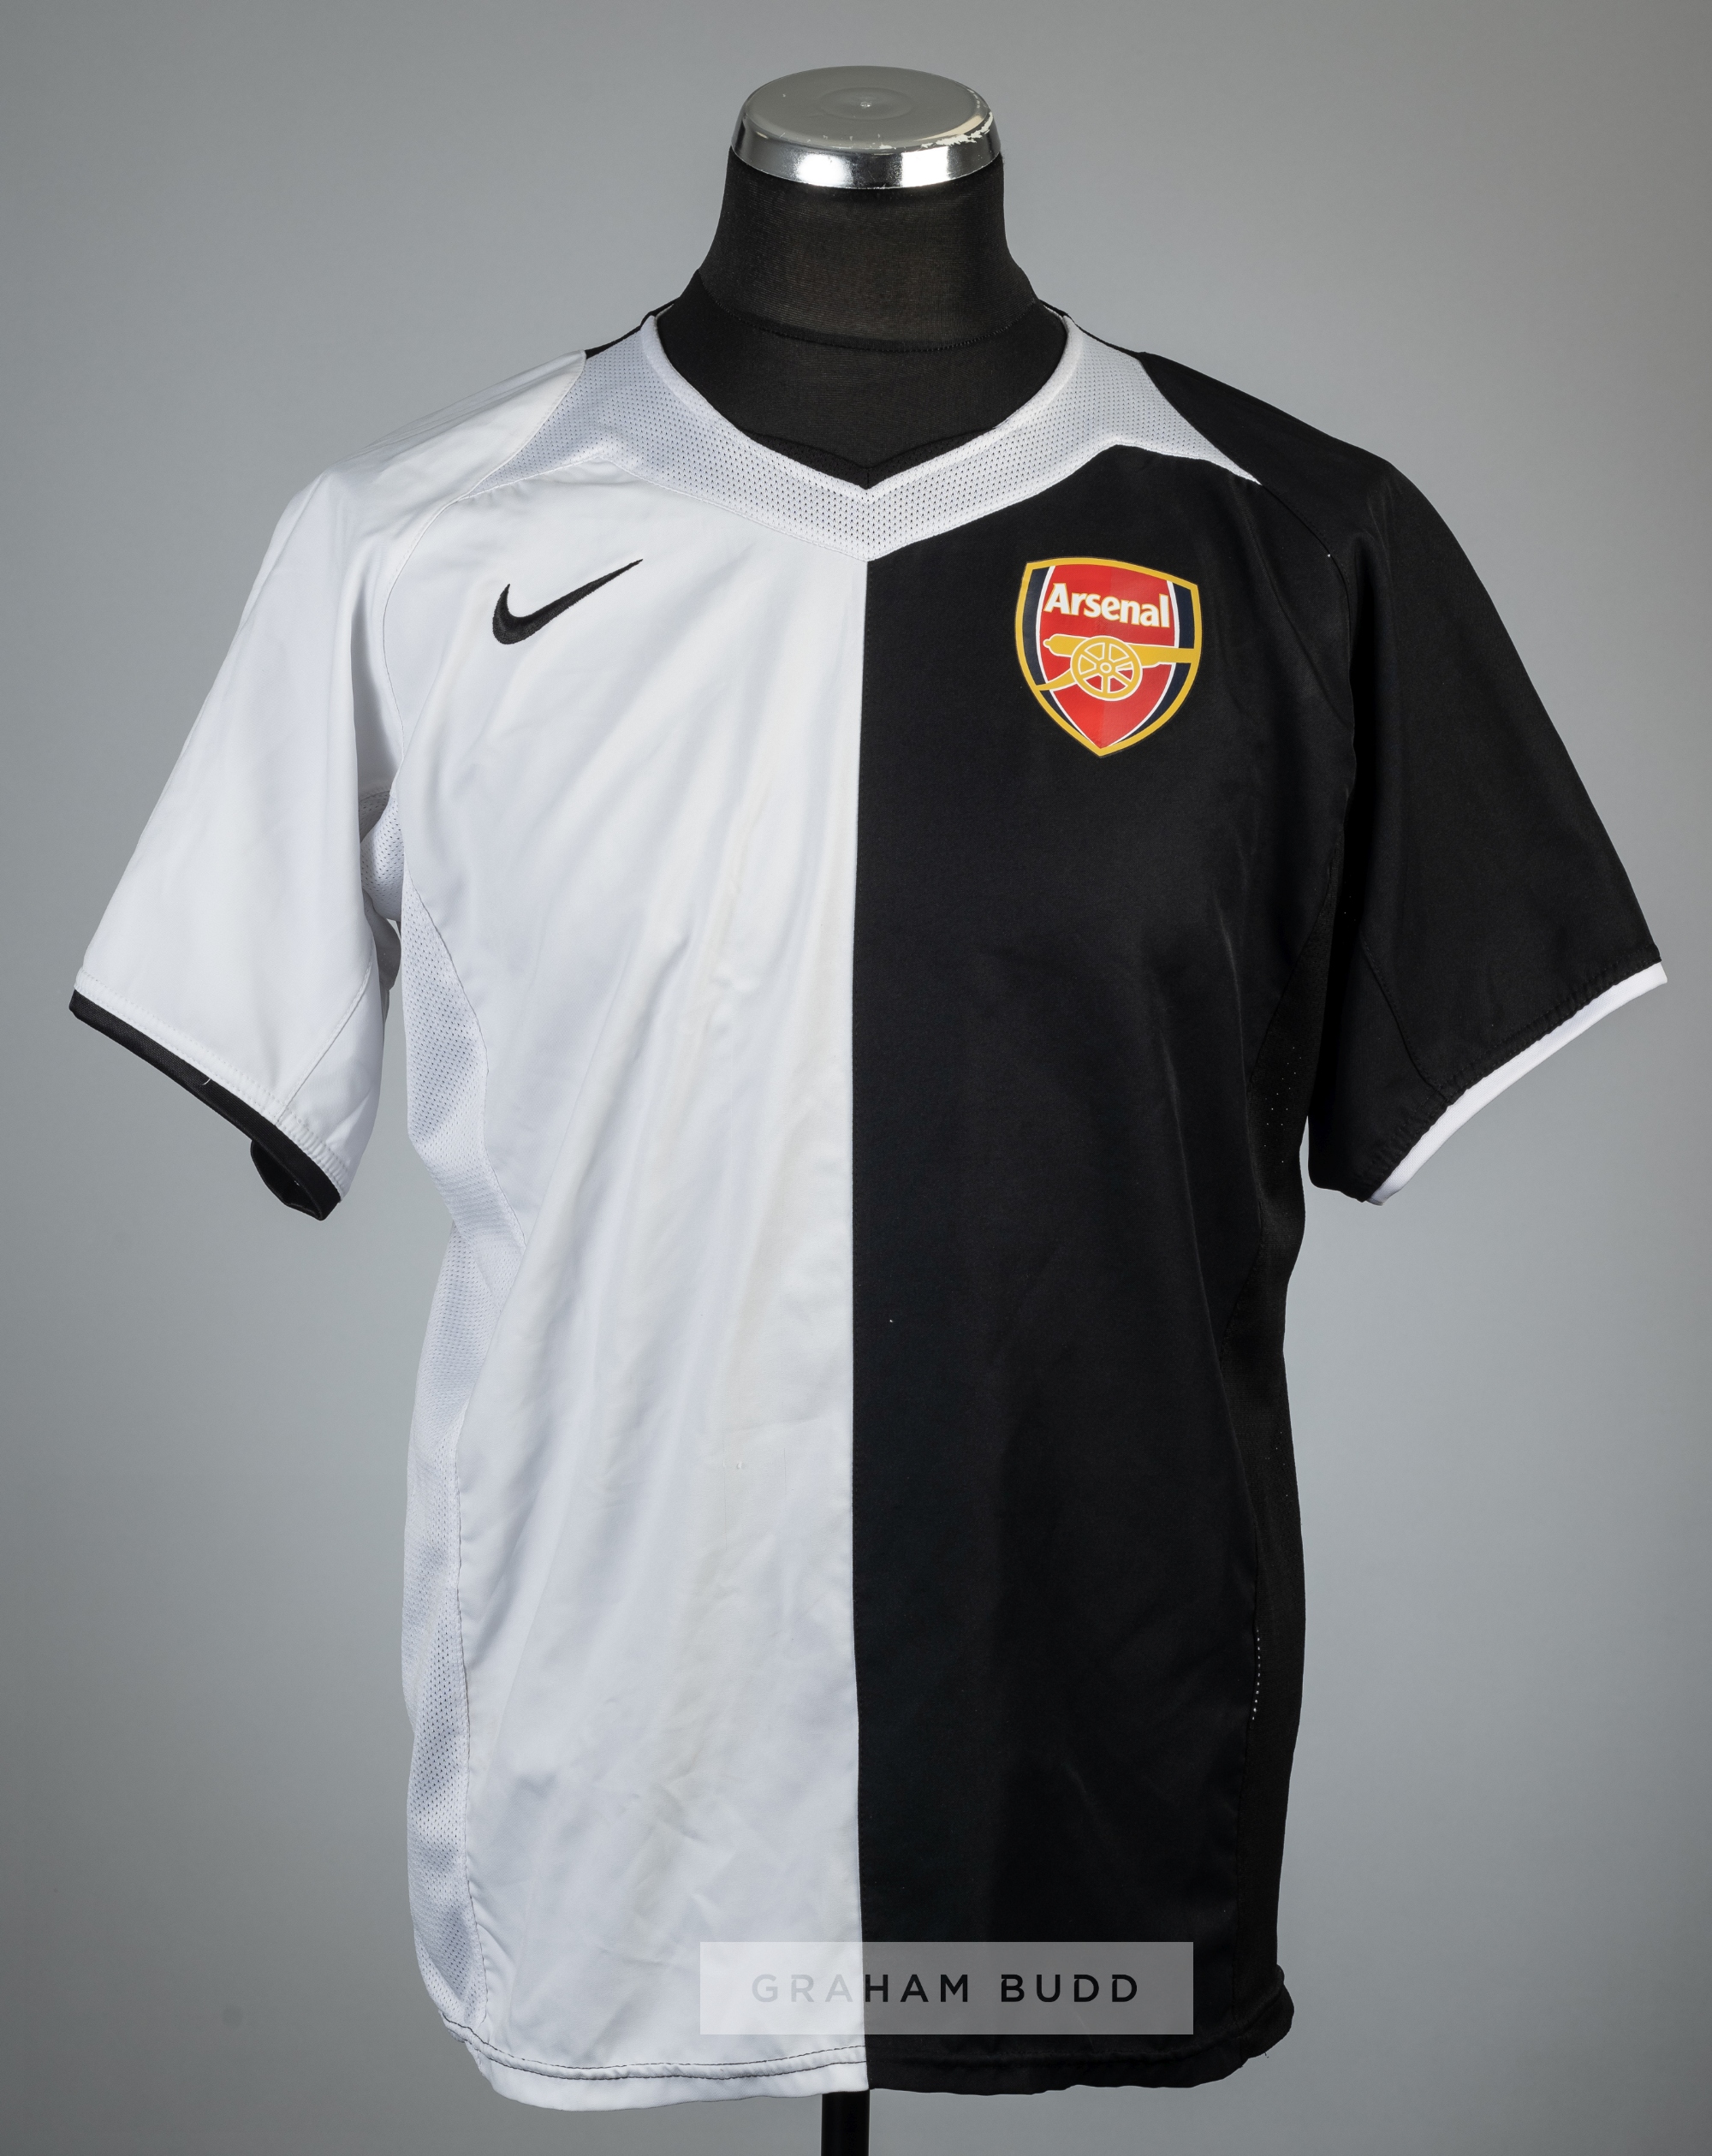 Thierry Henry black and white Arsenal Anti-Racism no.14 jersey, season 2004-05, Nike, short- - Image 2 of 2